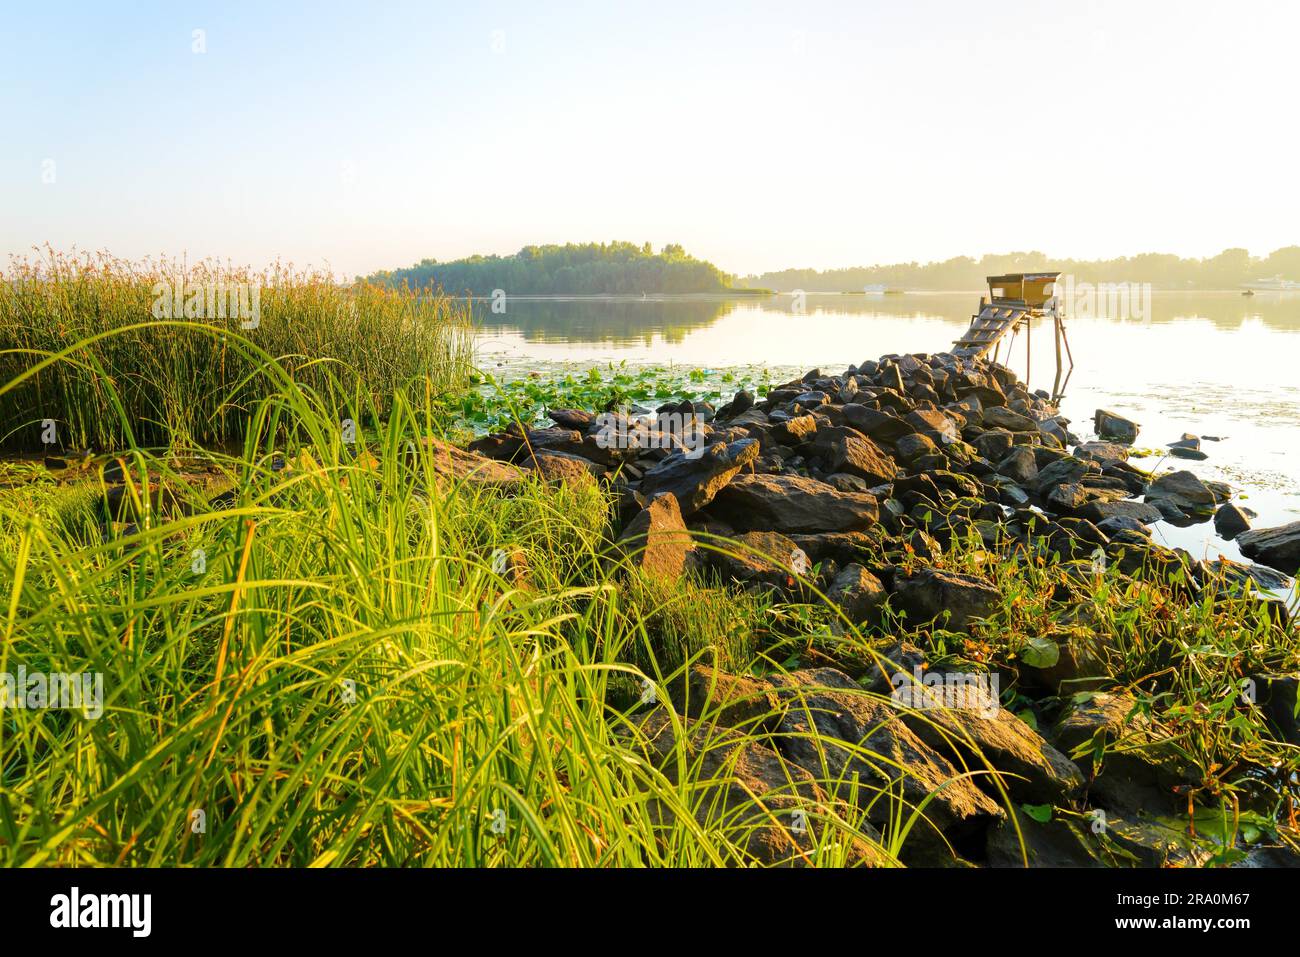 Footbridge, withstones, reeds, herbs and bulrush around. Dawn on the Dnieper river in Kiev. Yellow (Nuphar lutea) are floating on the water Stock Photo